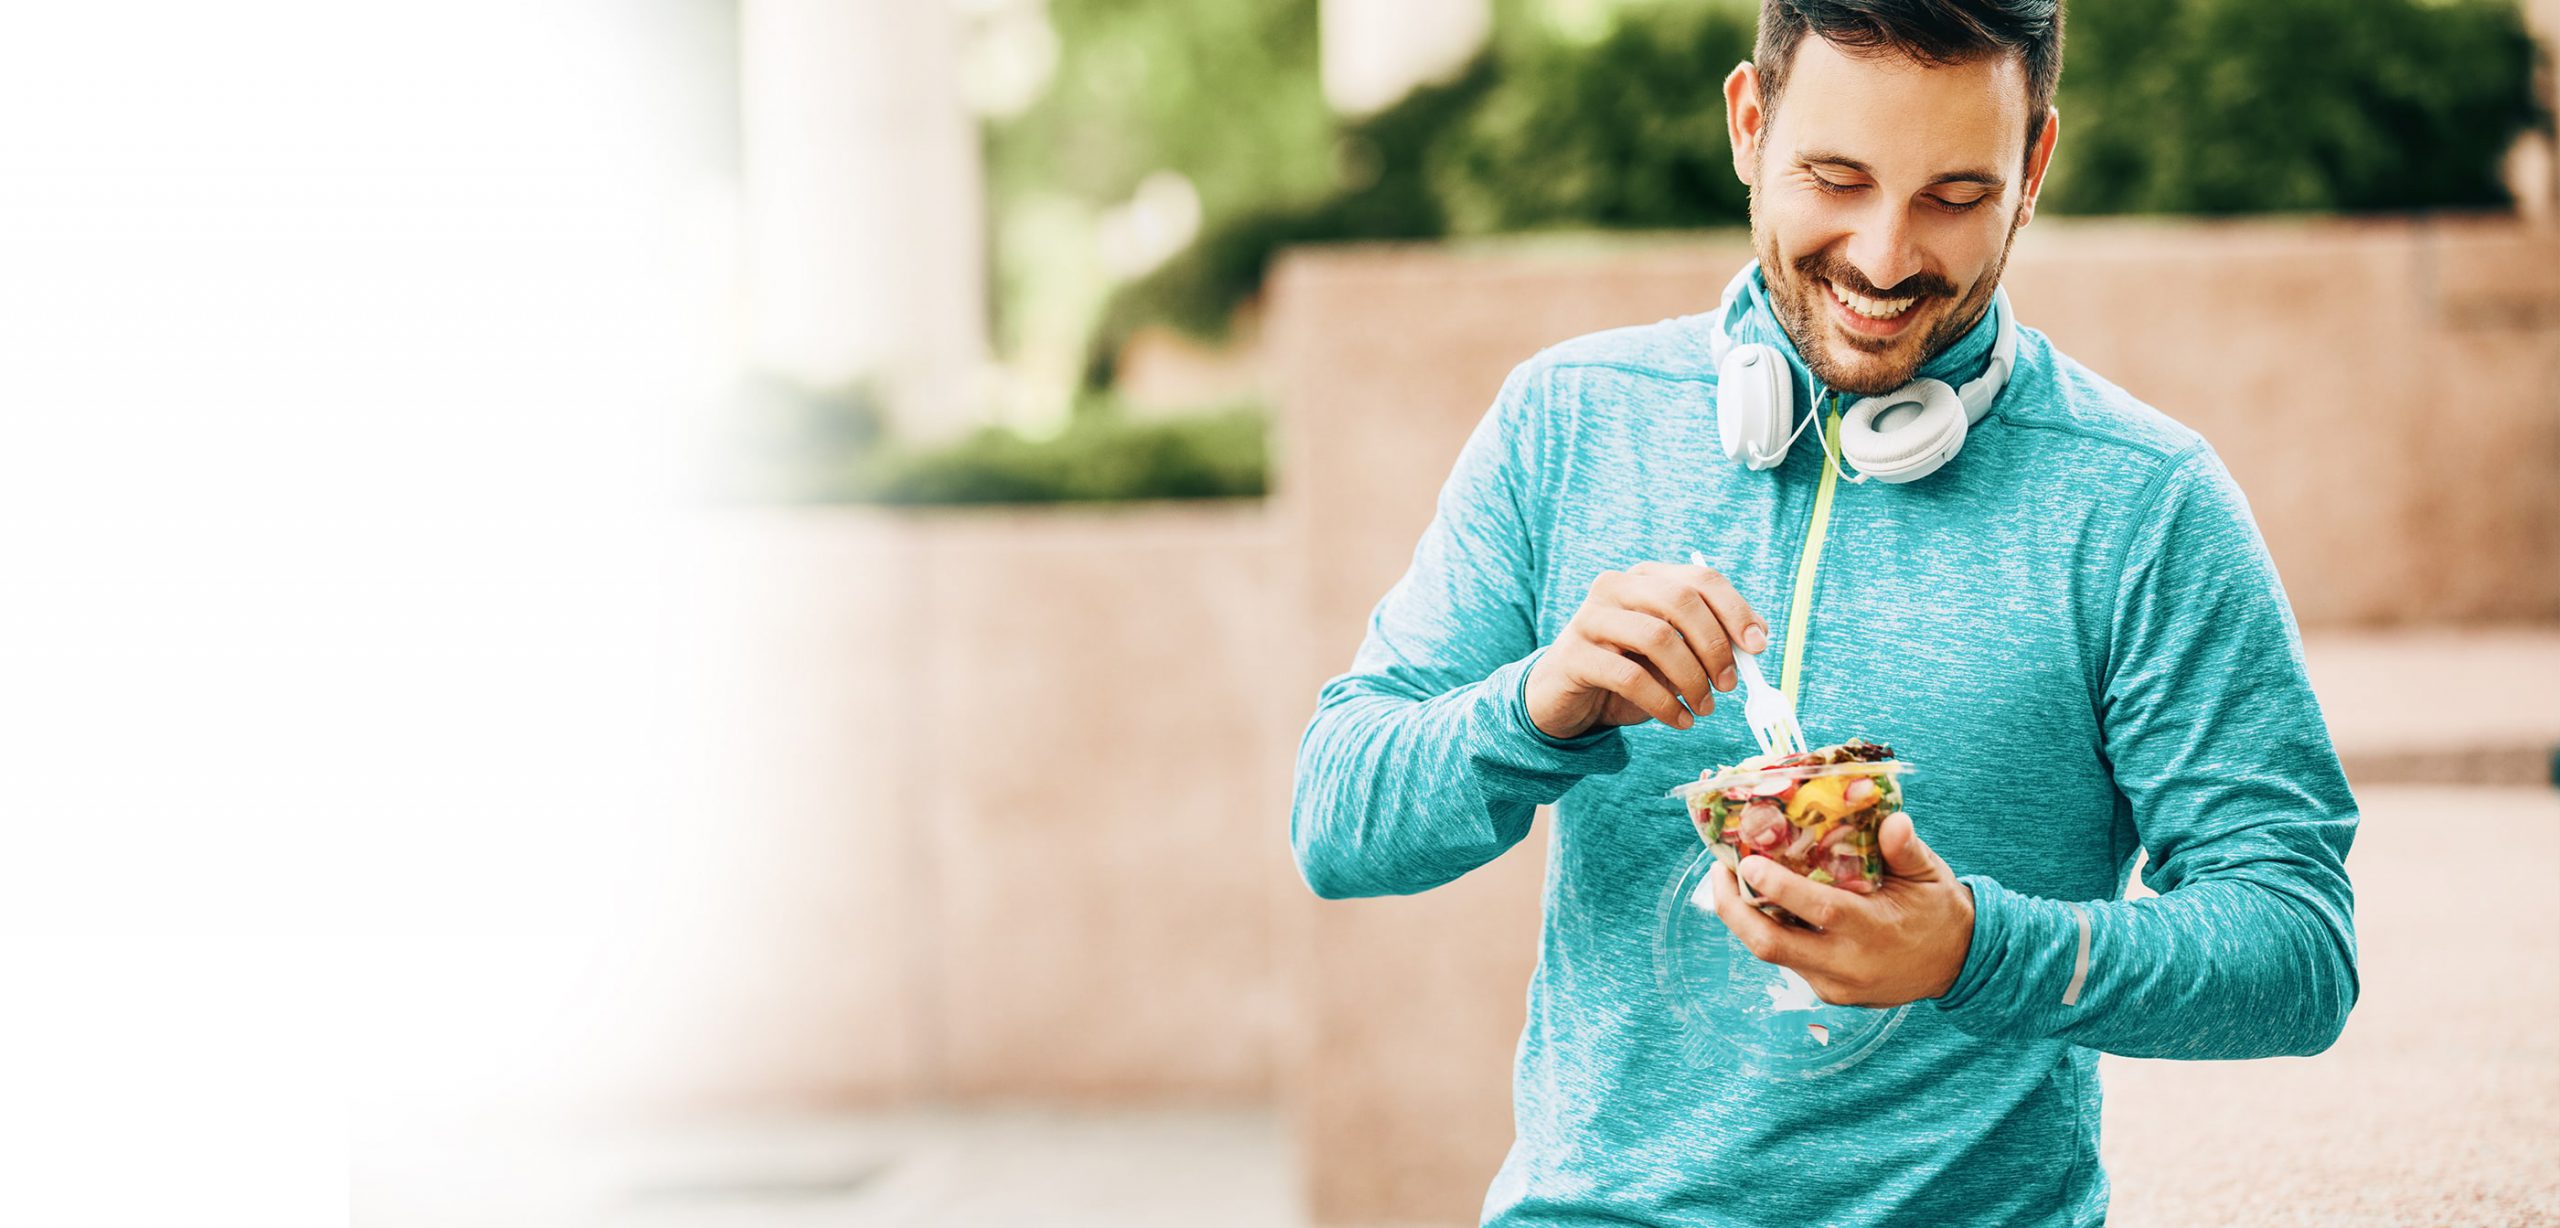 Man with headphones around his neck enjoying a healthy meal after working out.